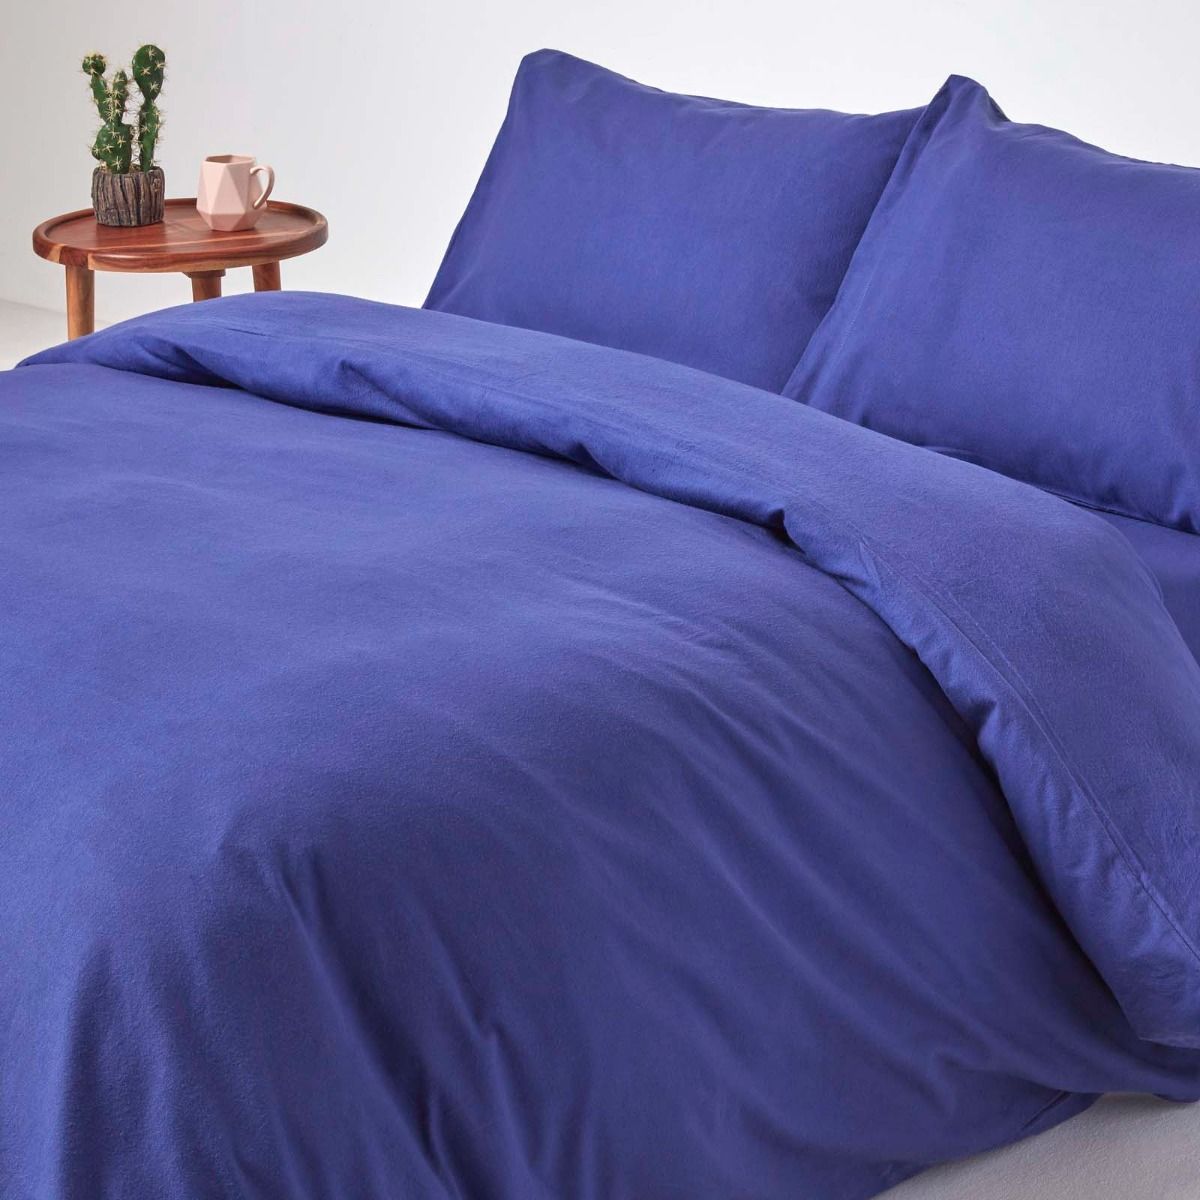 Navy Soft Portuguese Brushed Cotton, Very Soft Cotton Duvet Covers